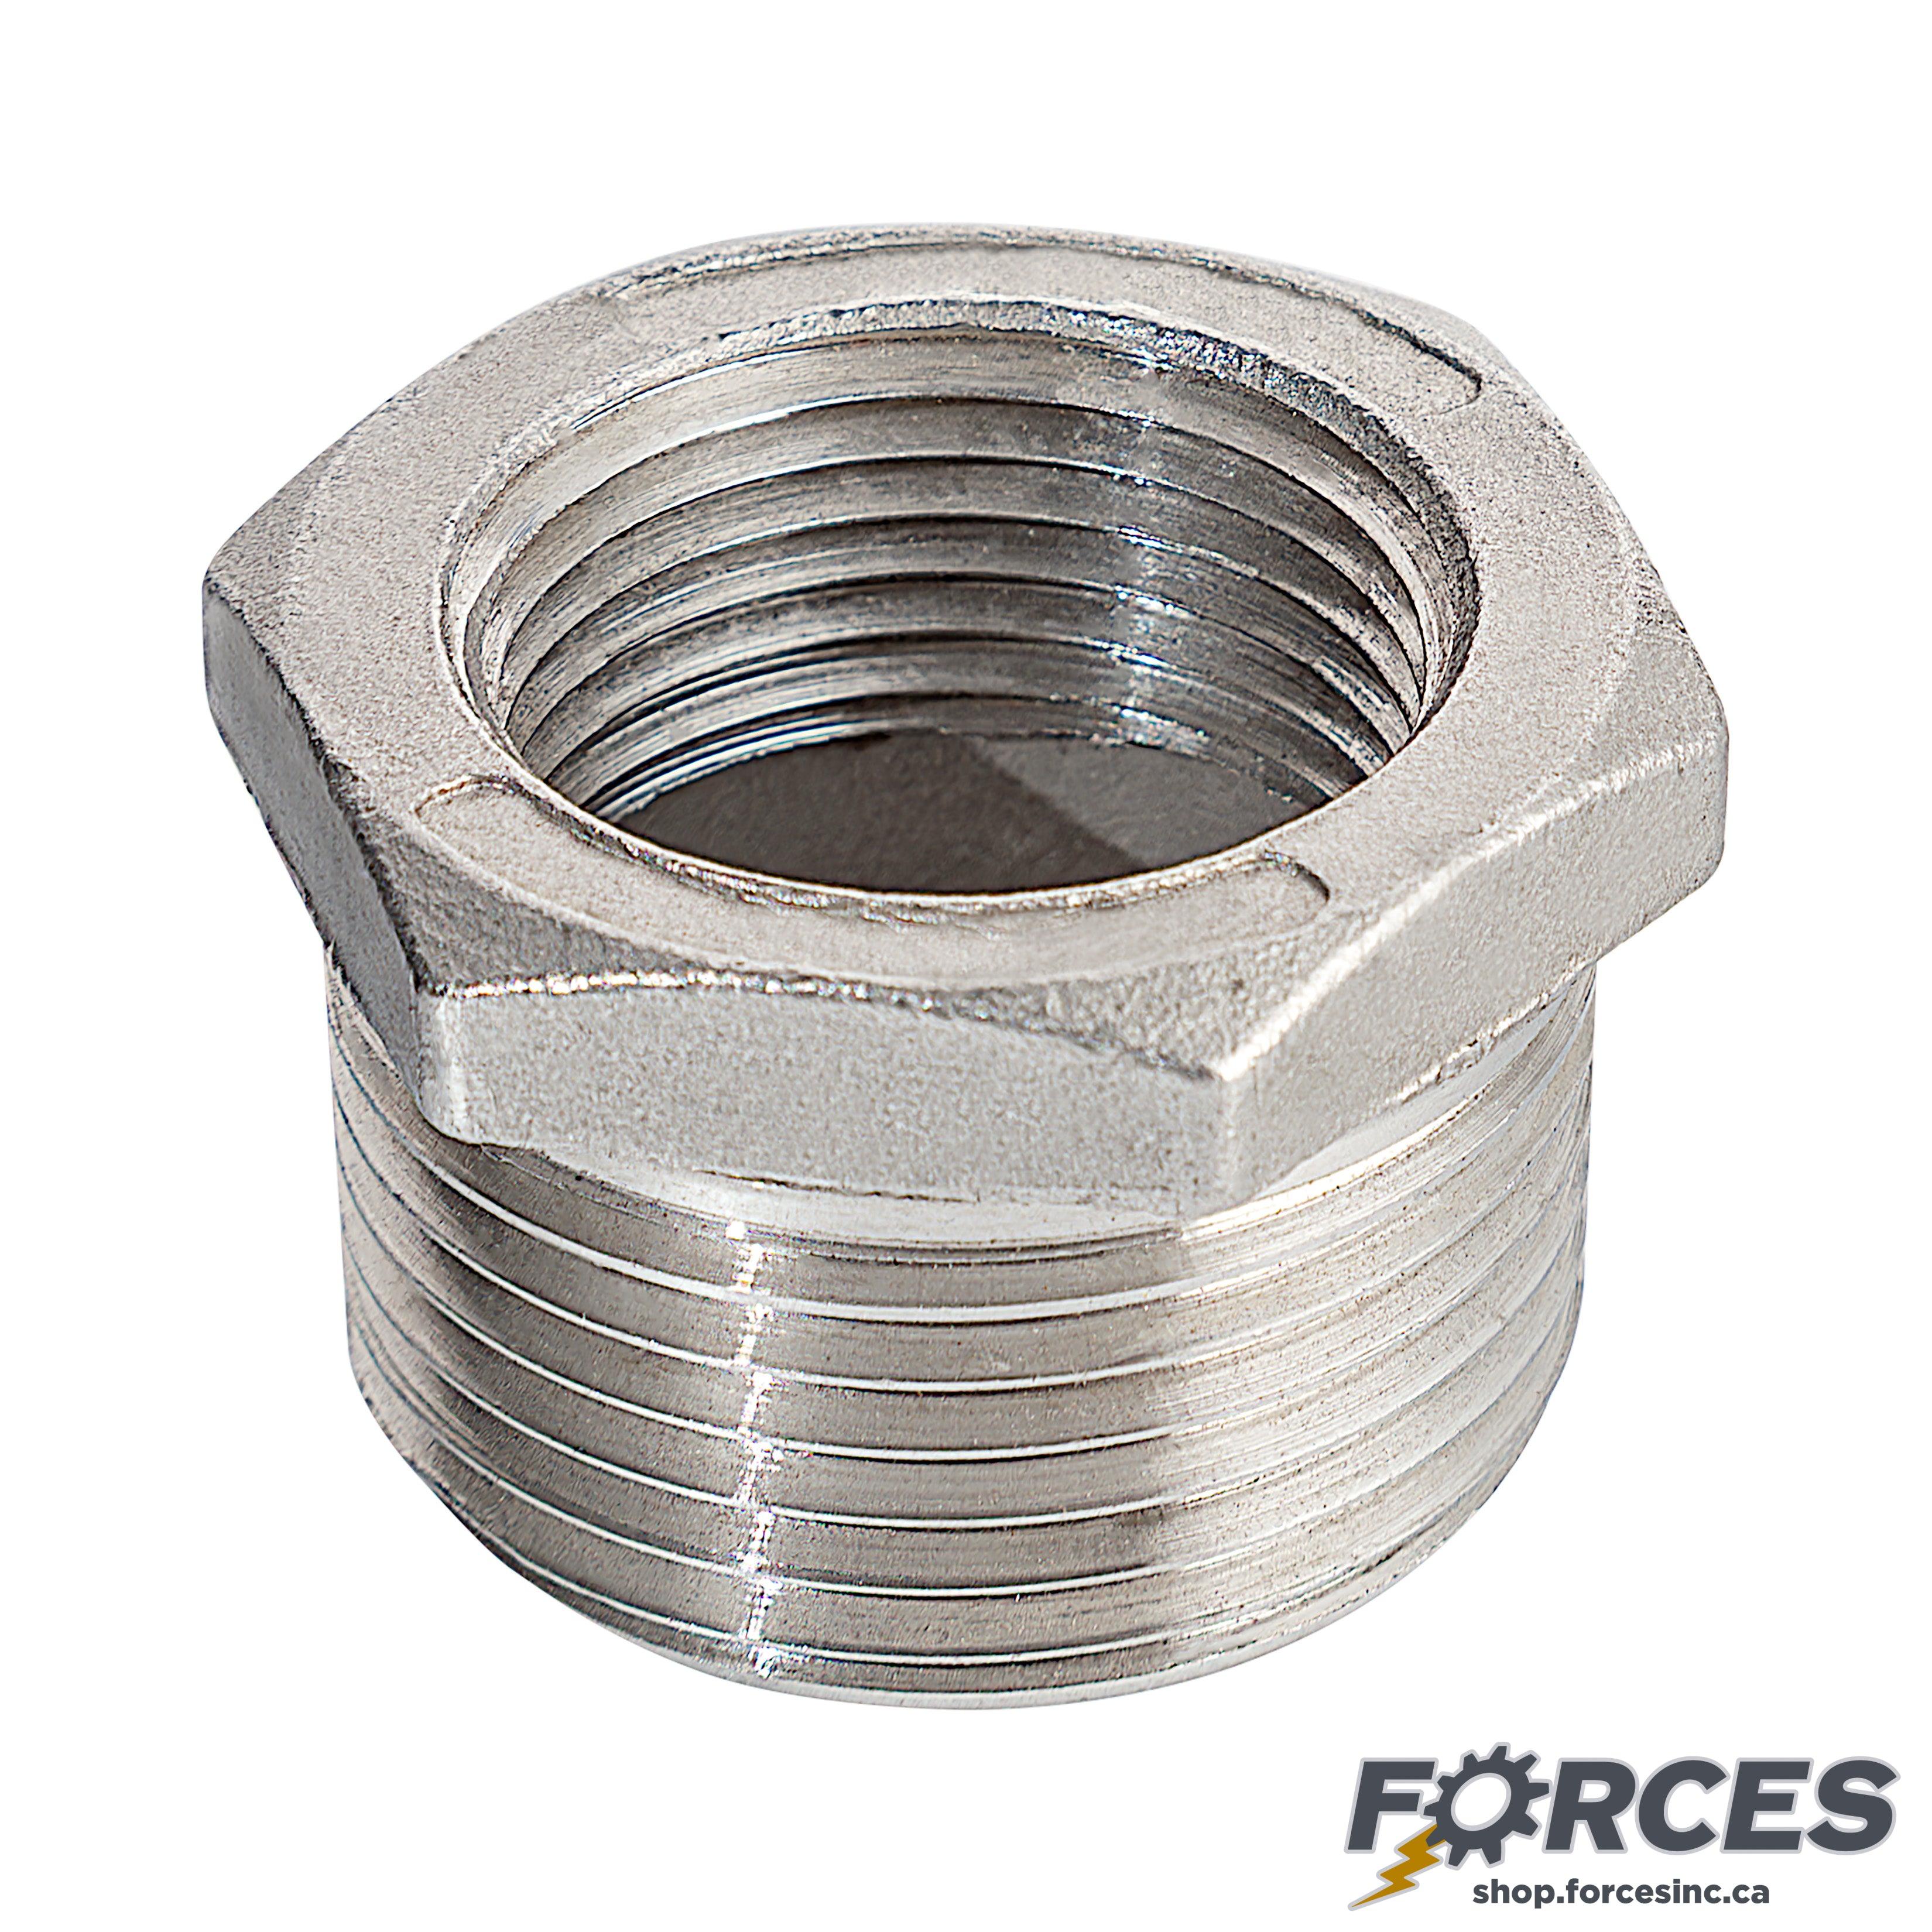 2-1/2" (M) x 2" (F) Reducing Hex Bushing NPT #150 - Stainless Steel 316 - Forces Inc